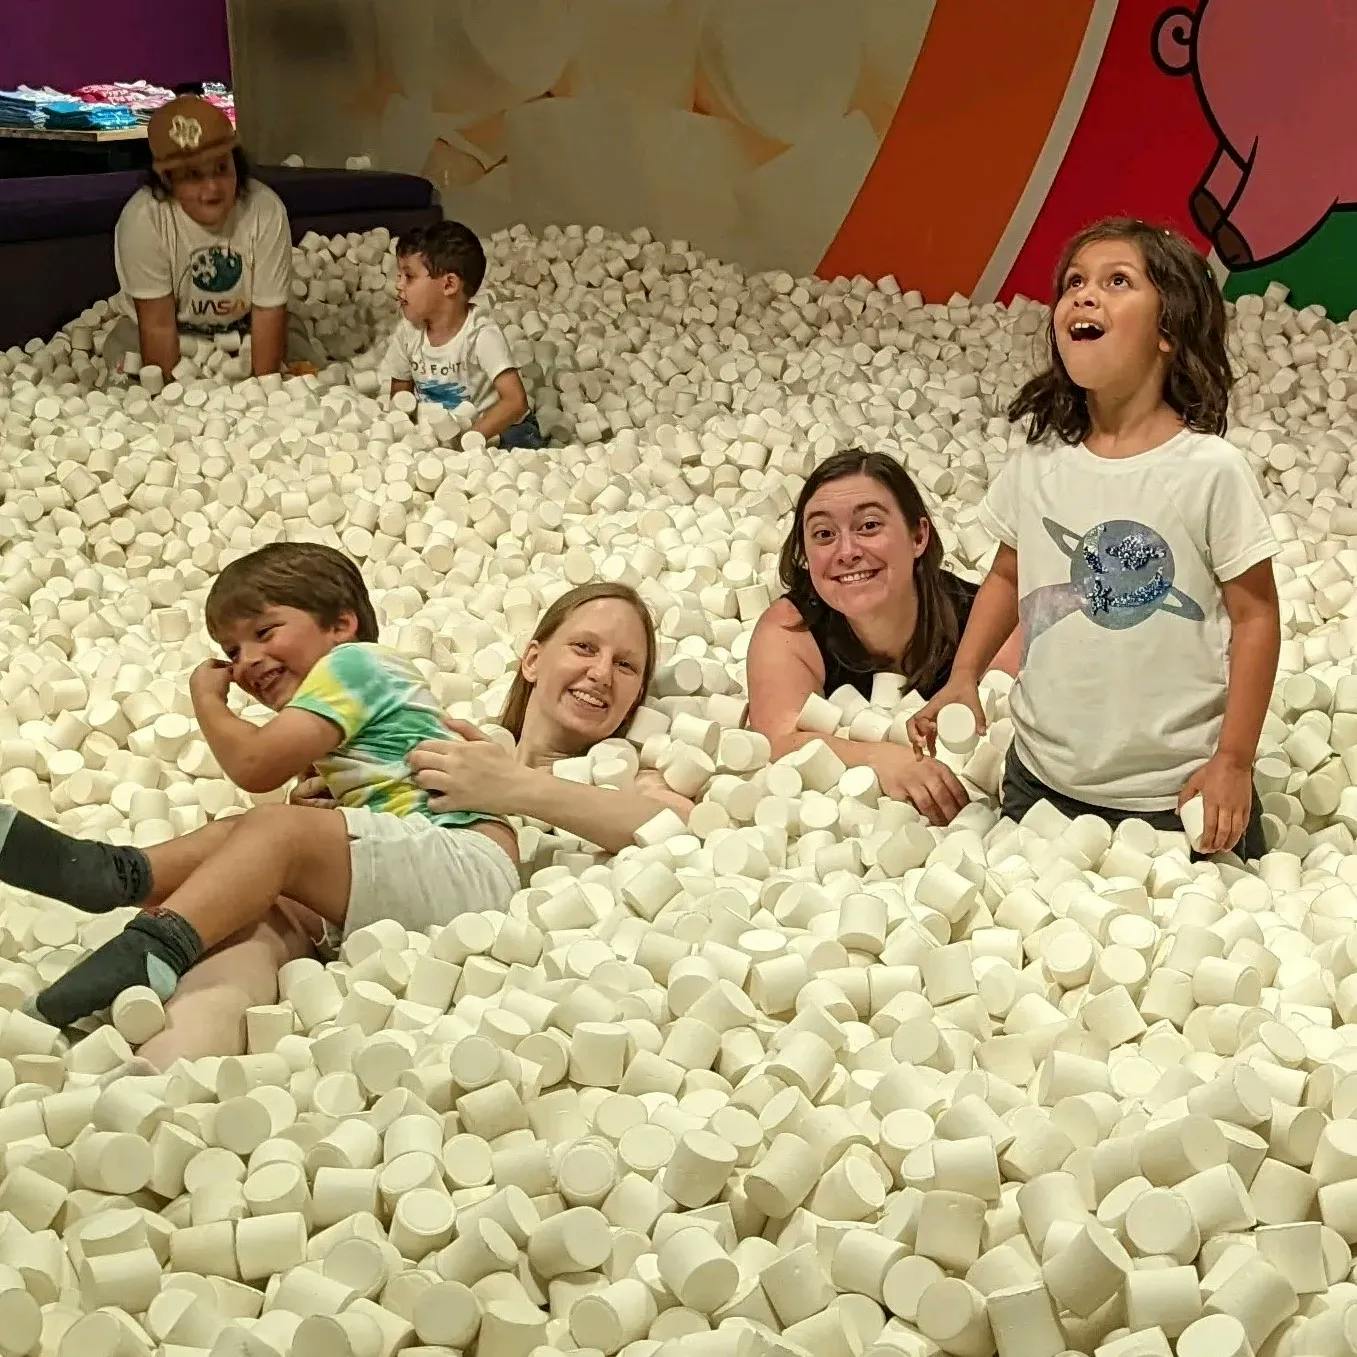 A pit of marshmallows? Yes please!